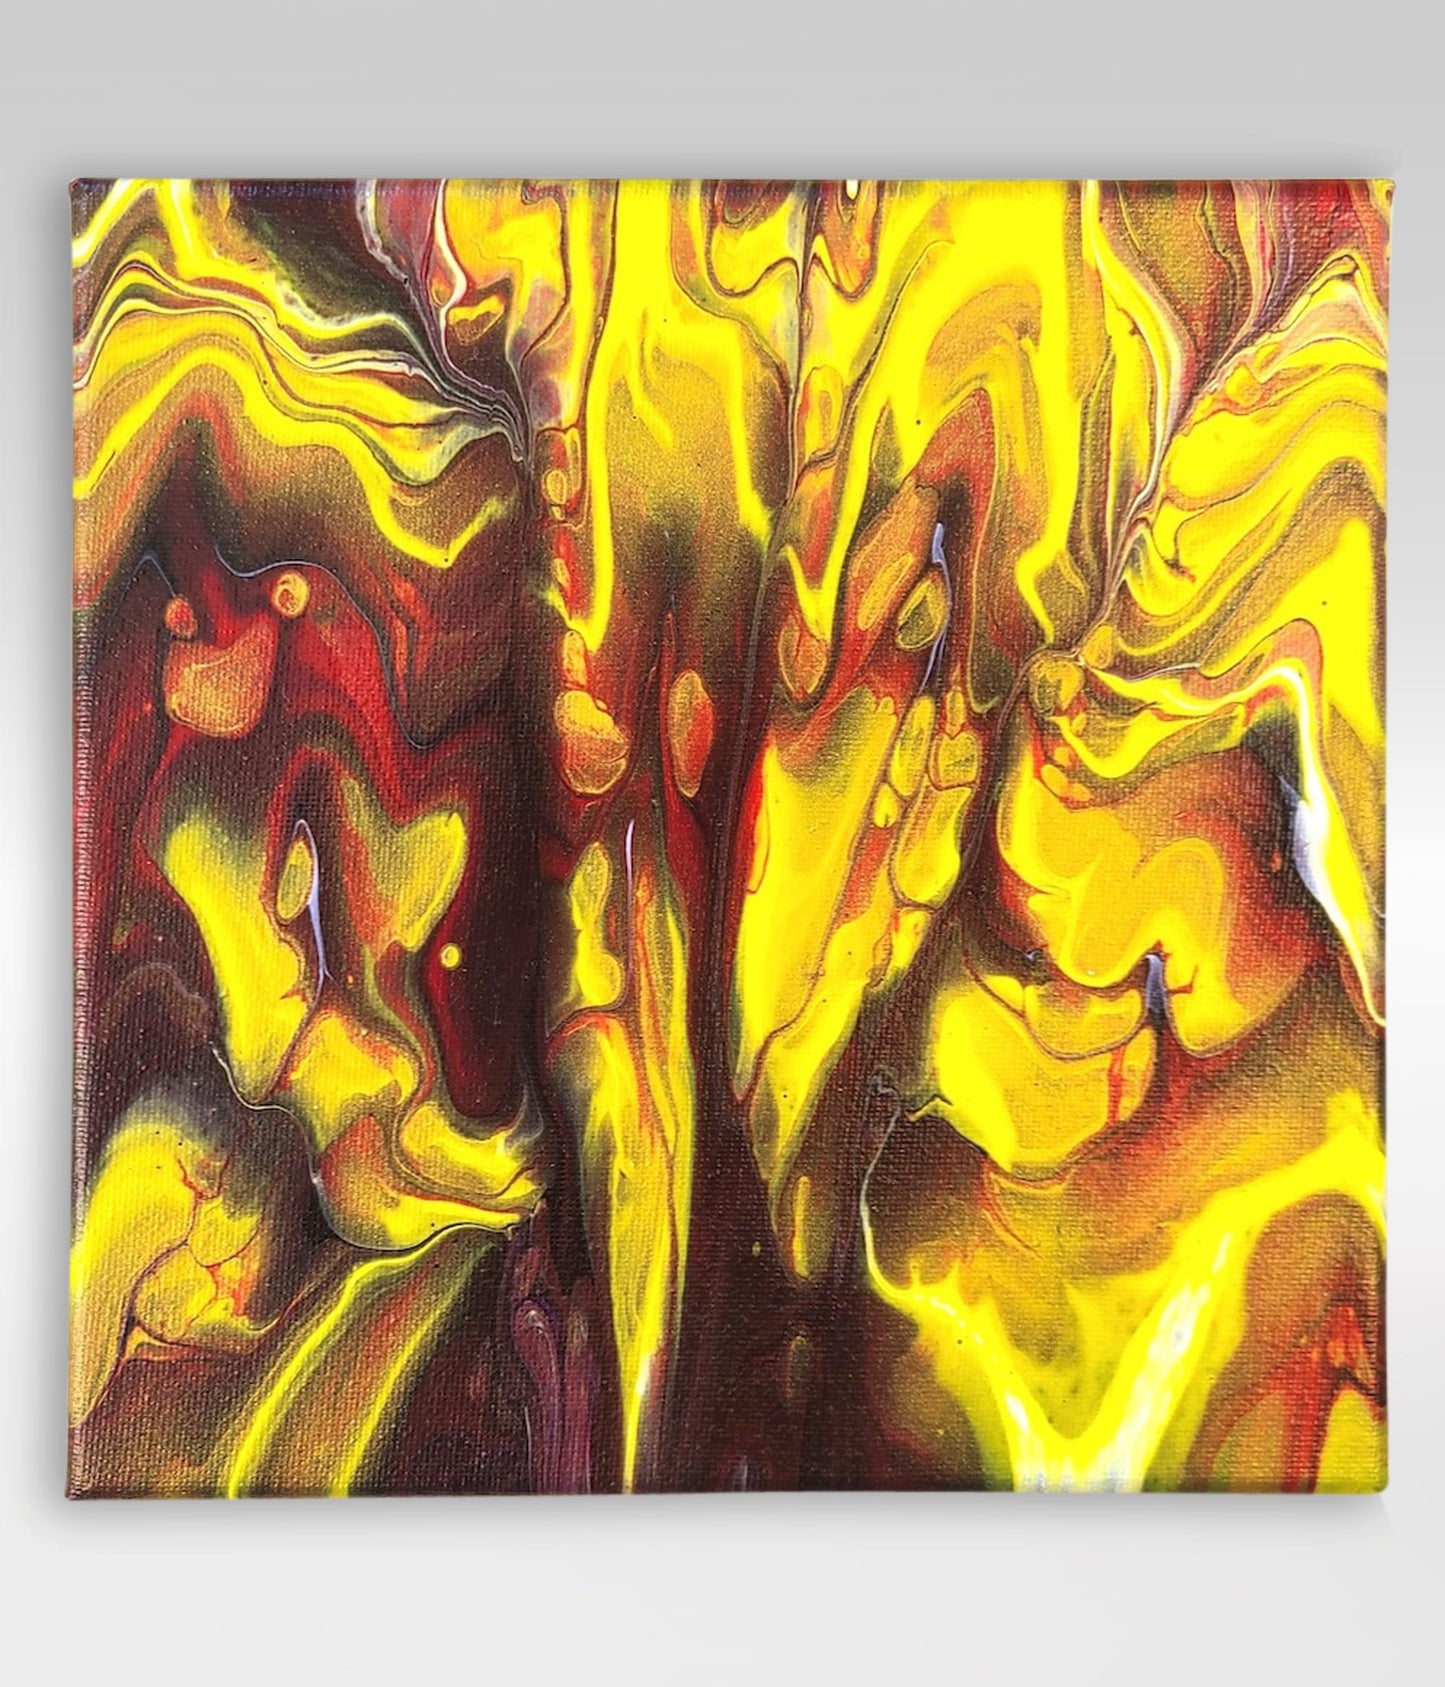 Hell Pit – 8 x 8 Acrylic Pour Painting On Canvas